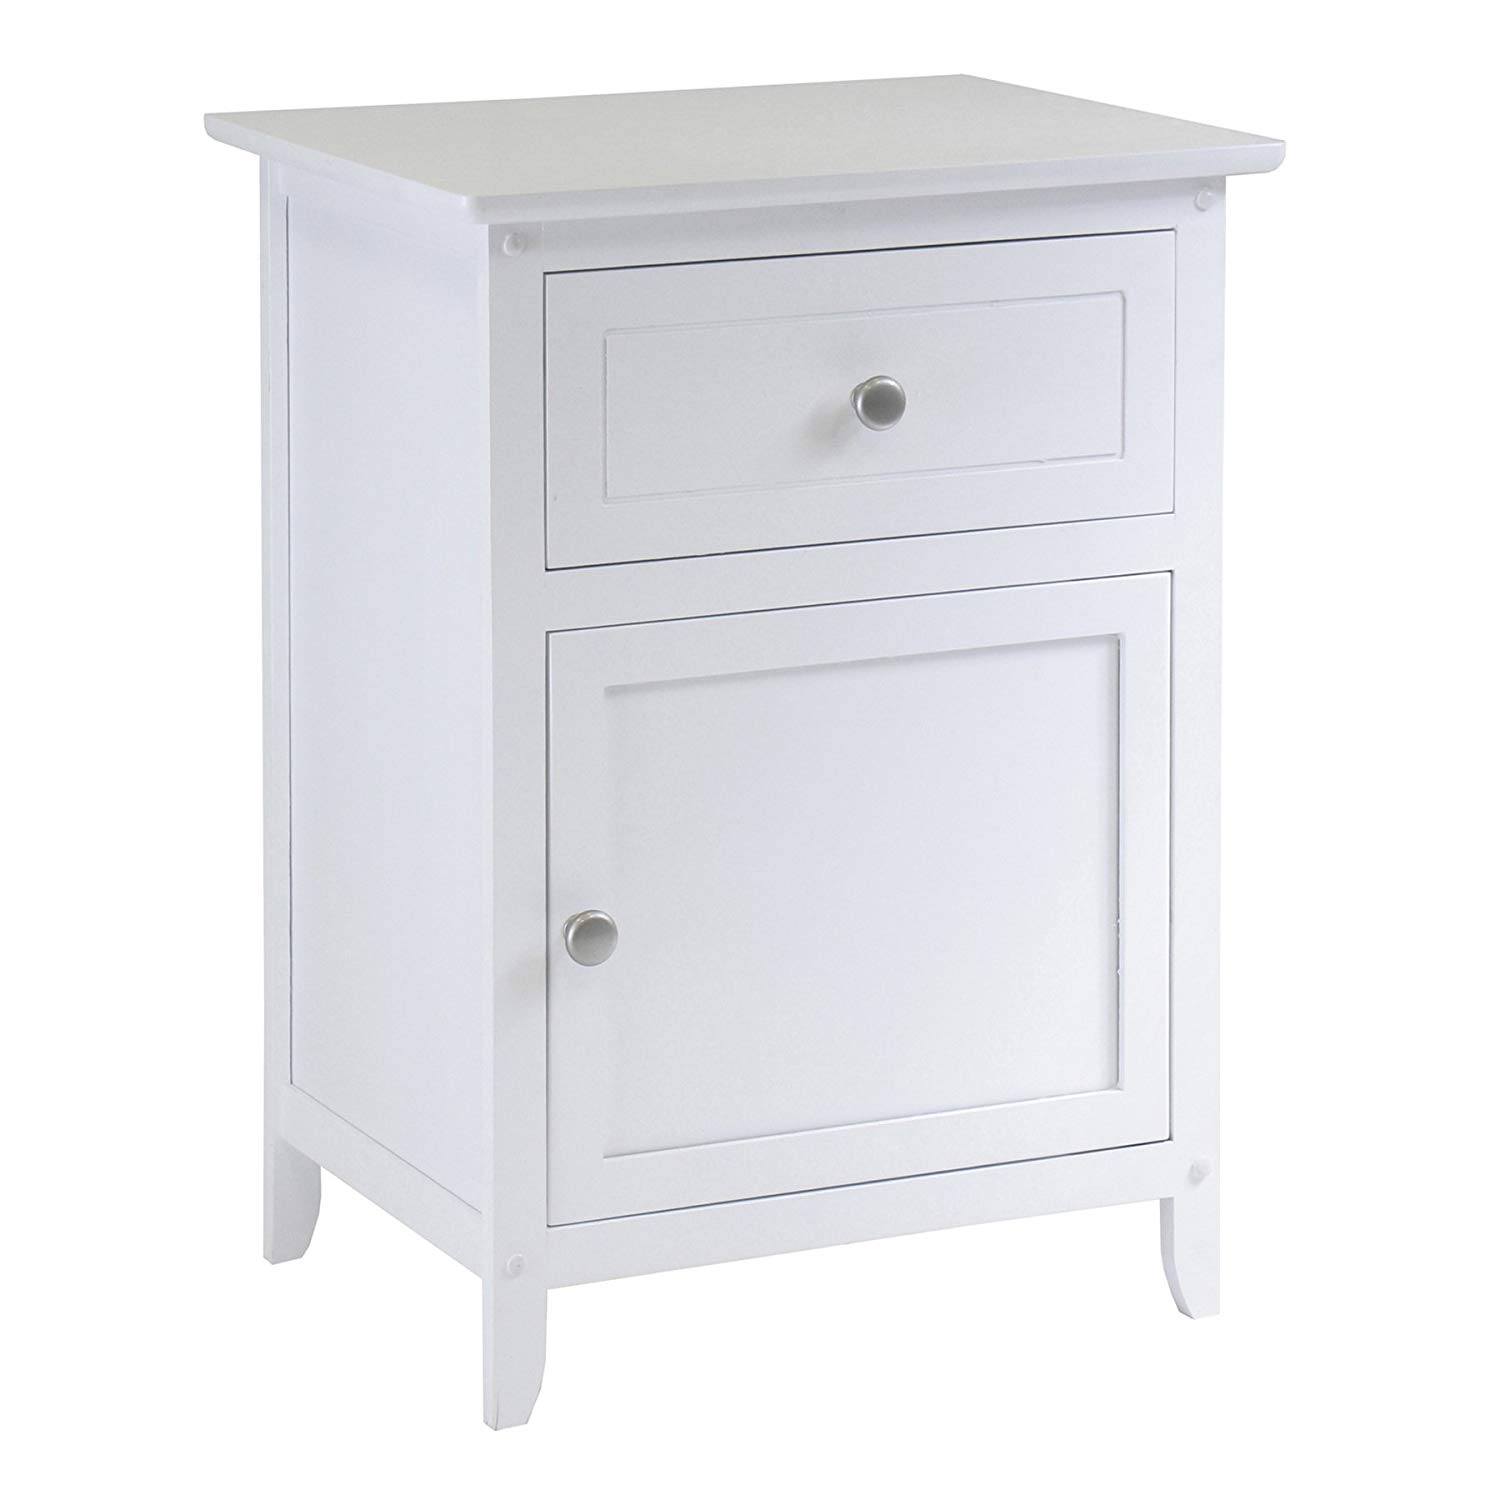 fresh white end table with drawer margate threshold target storage winsome wood night stand accent and cabinet for home kitchen dark top basket magazine rack charging station